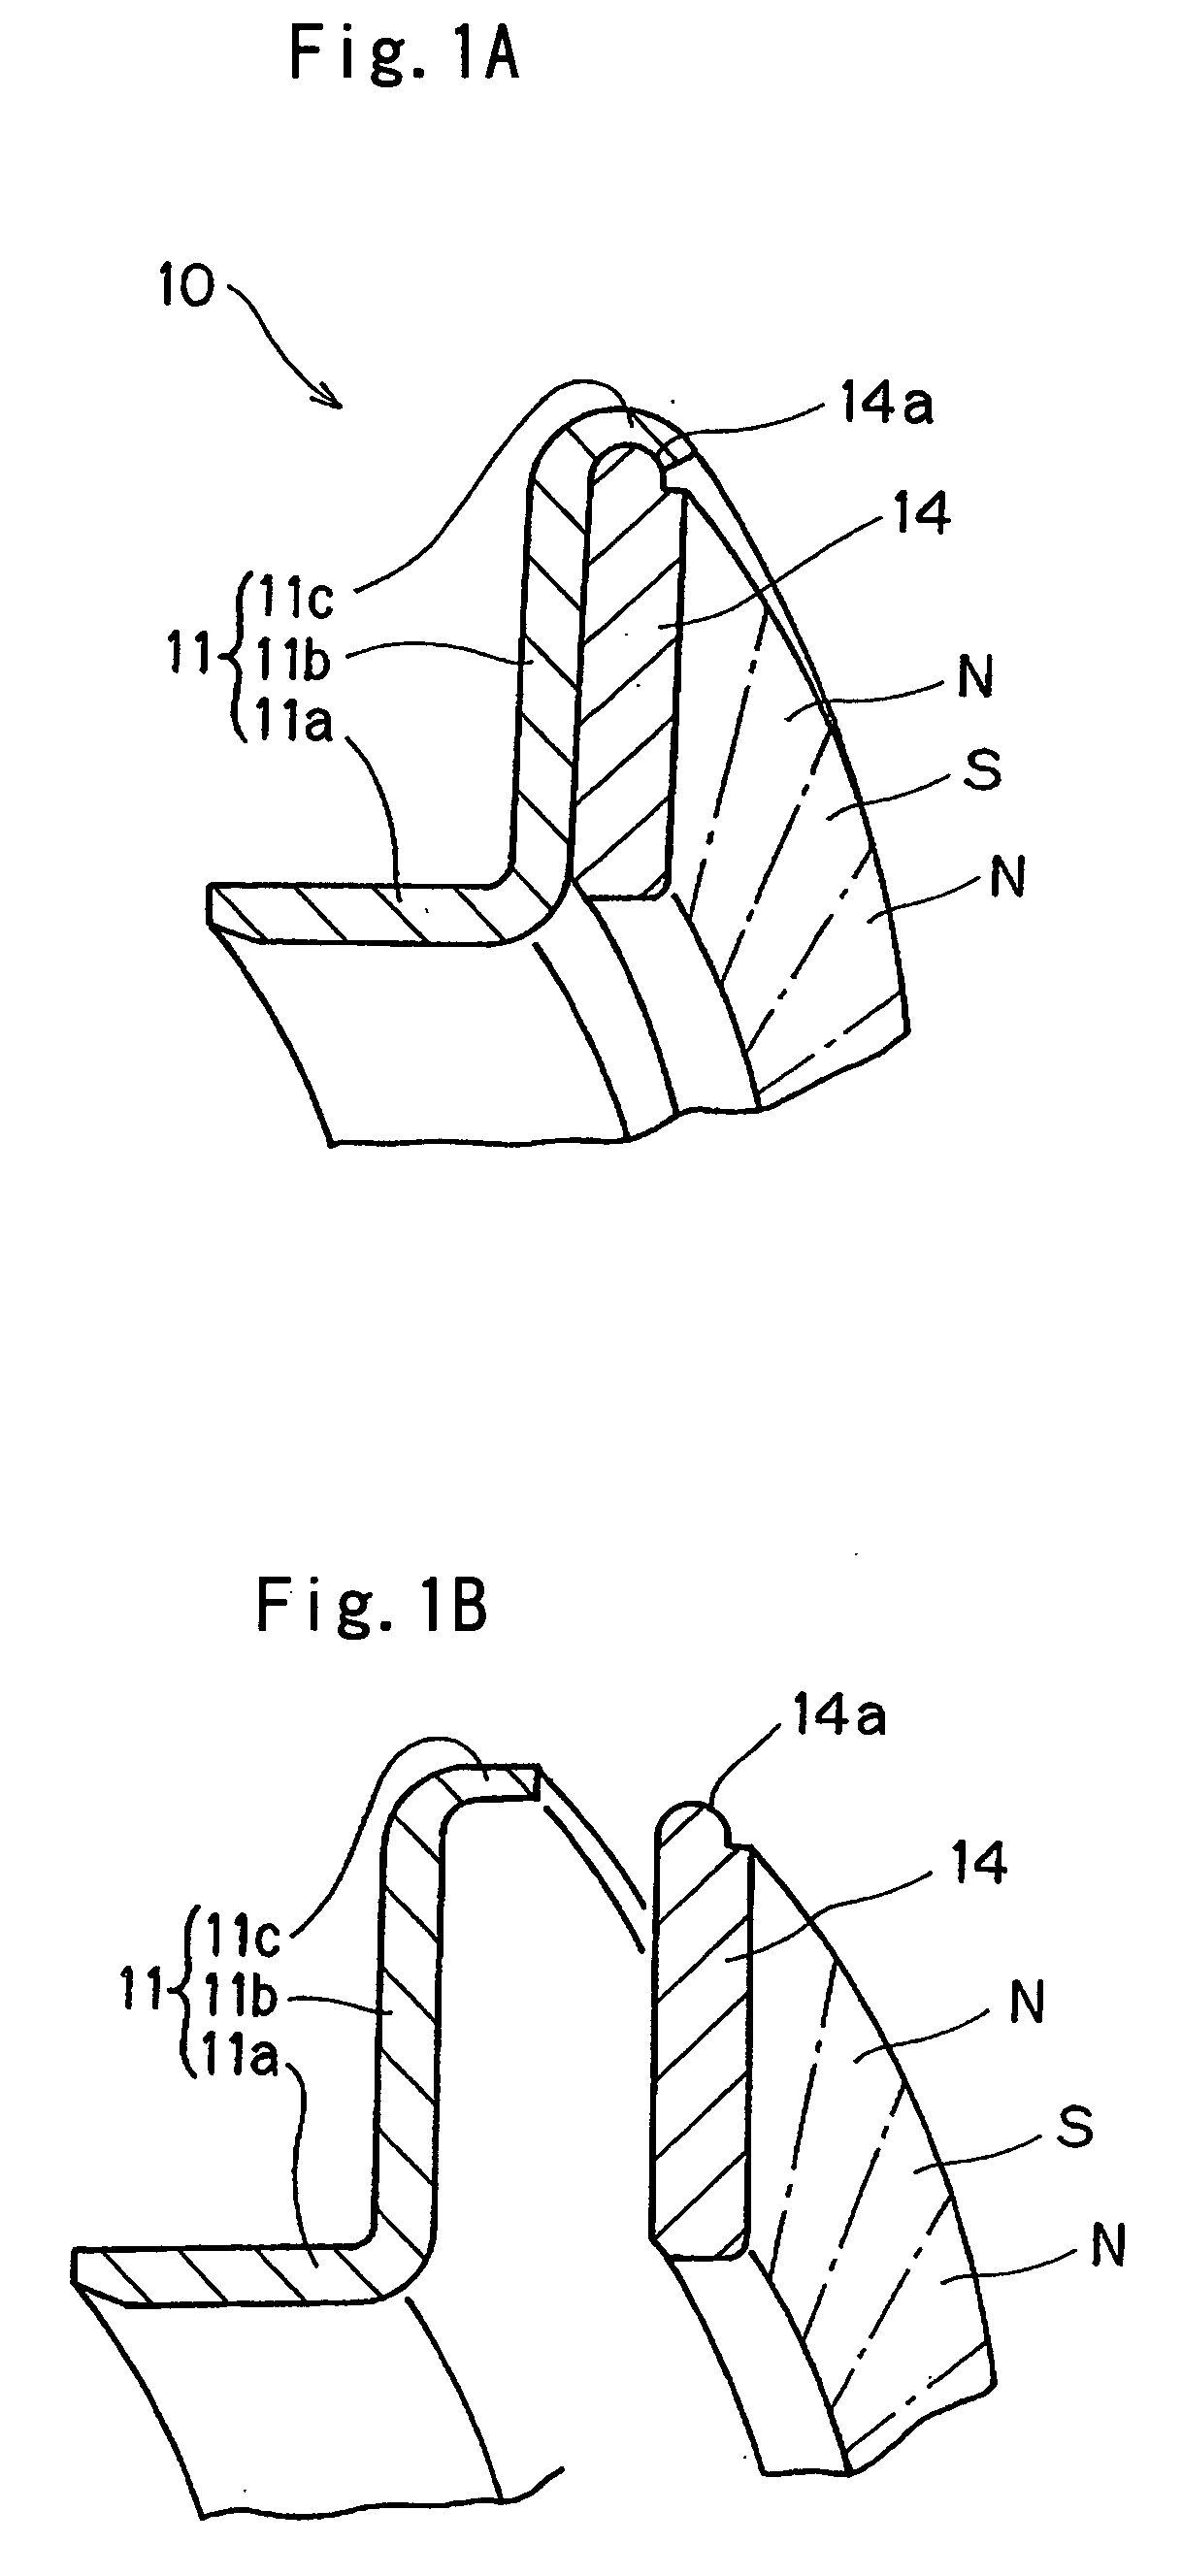 Magnetic encoder and wheel support bearing assembly using the same